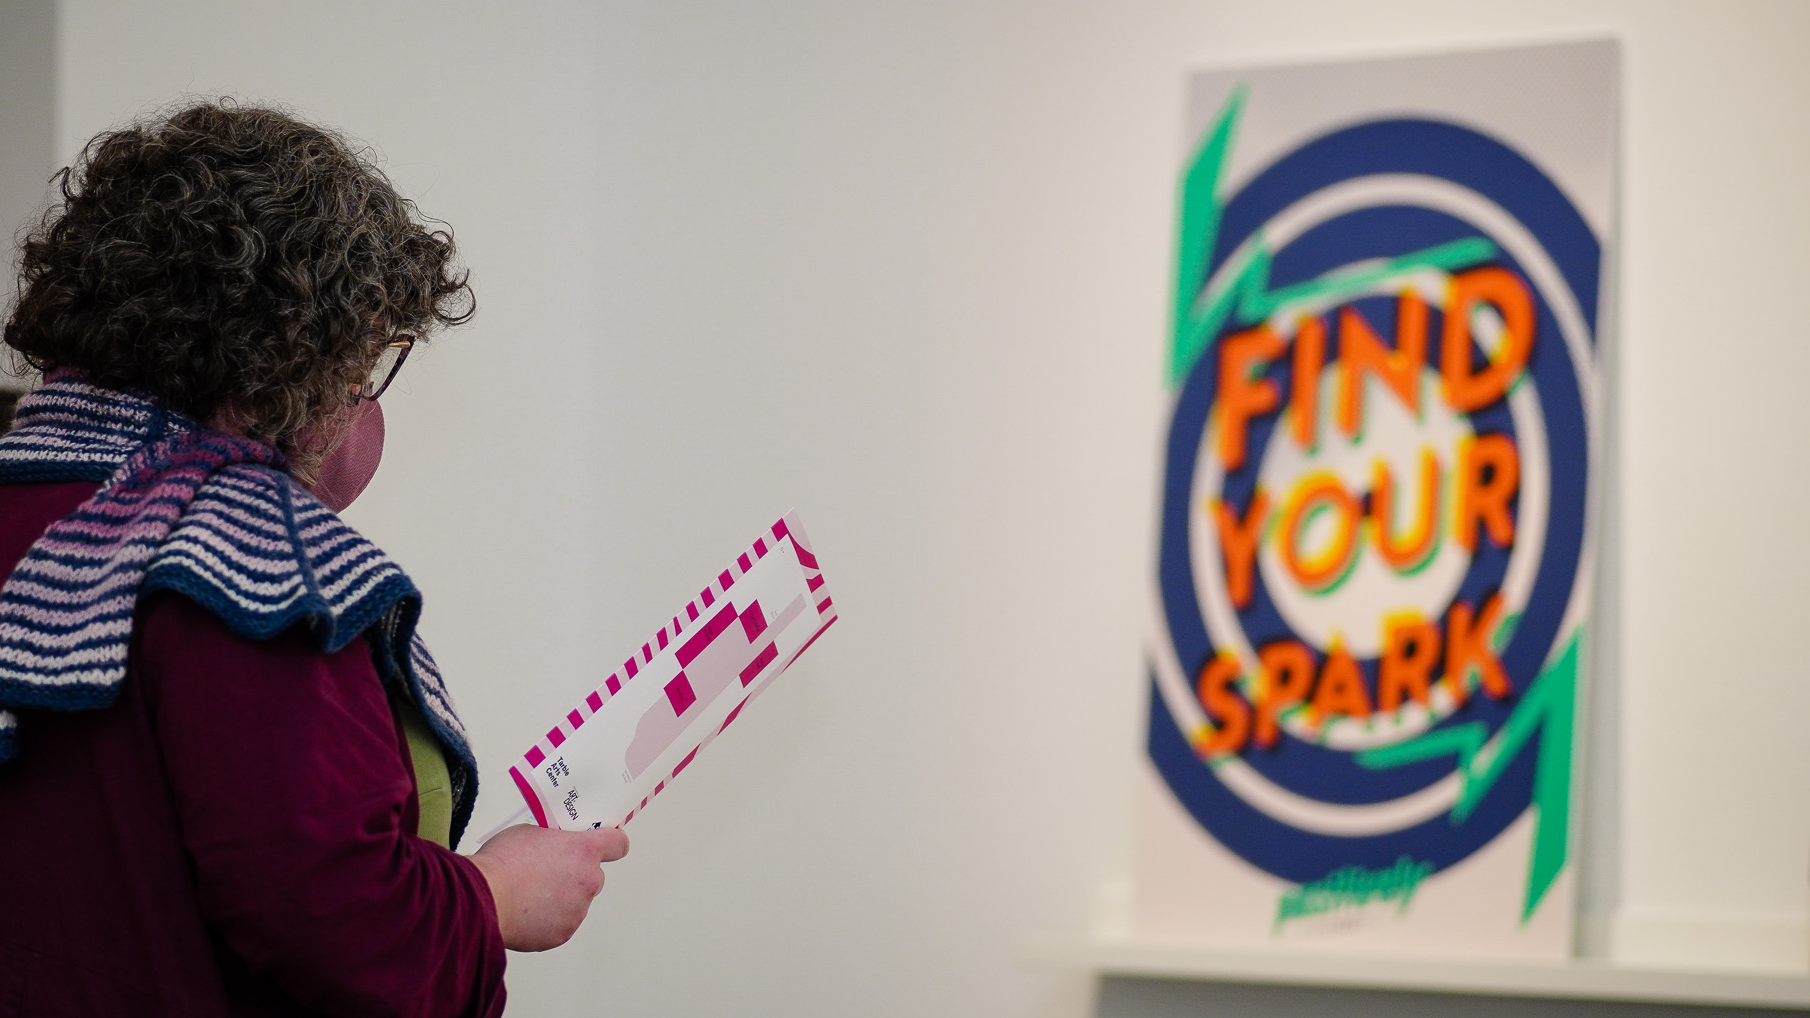 A woman stands holding a gallery guide looking at a large poster that says "Find Your Spark"